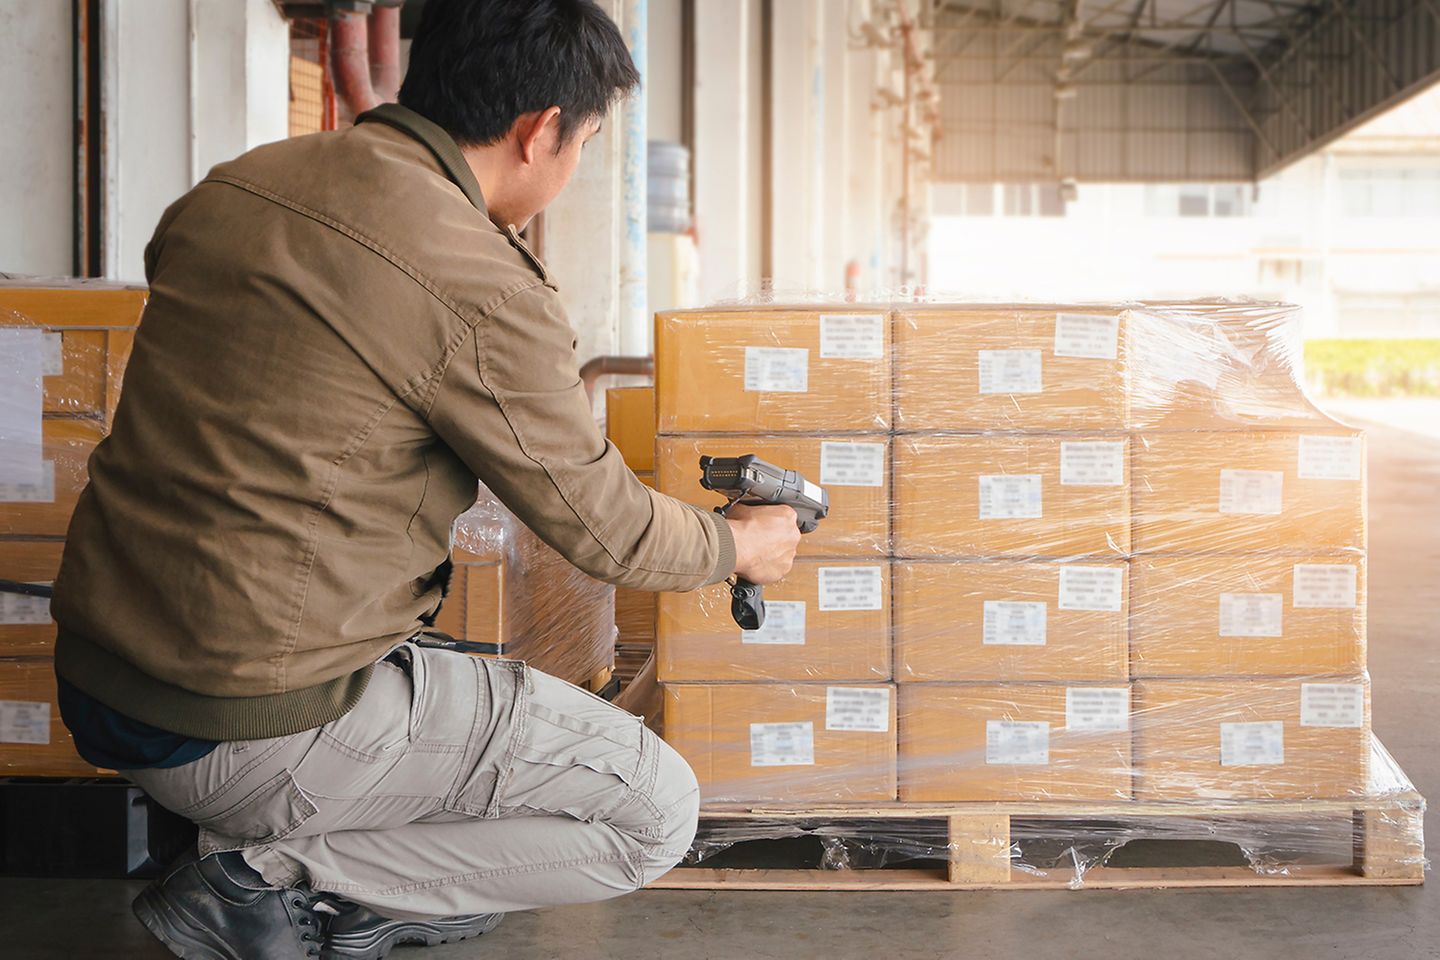 Warehouse Worker Scanning Barcode Scanner on Package Box